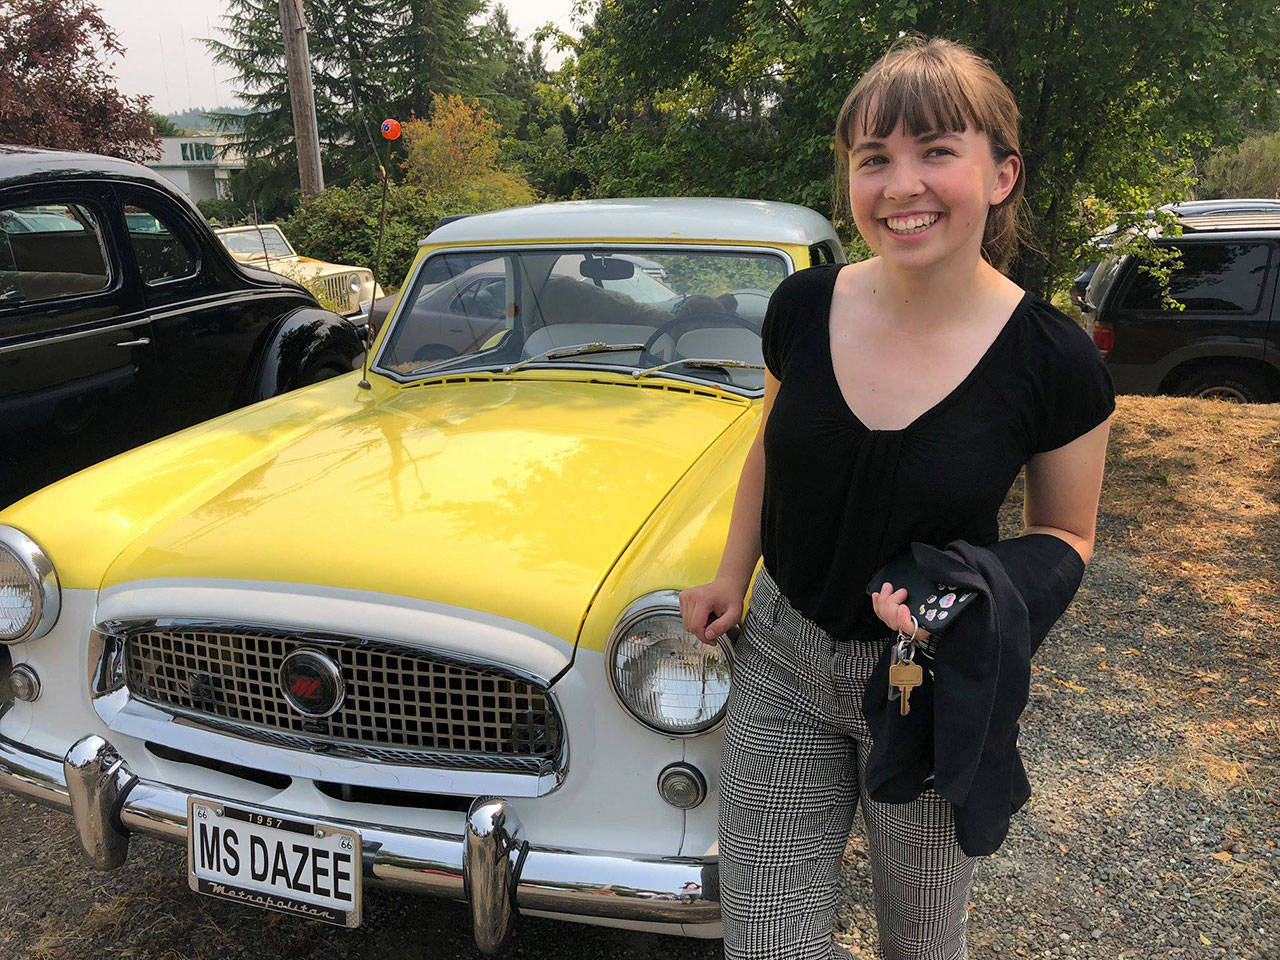 Islander Ellie Hughes posed beside her favorite “dream-mobile” at the 2018 car show at Engels Repair and Towing (Tom Hughes Photo).